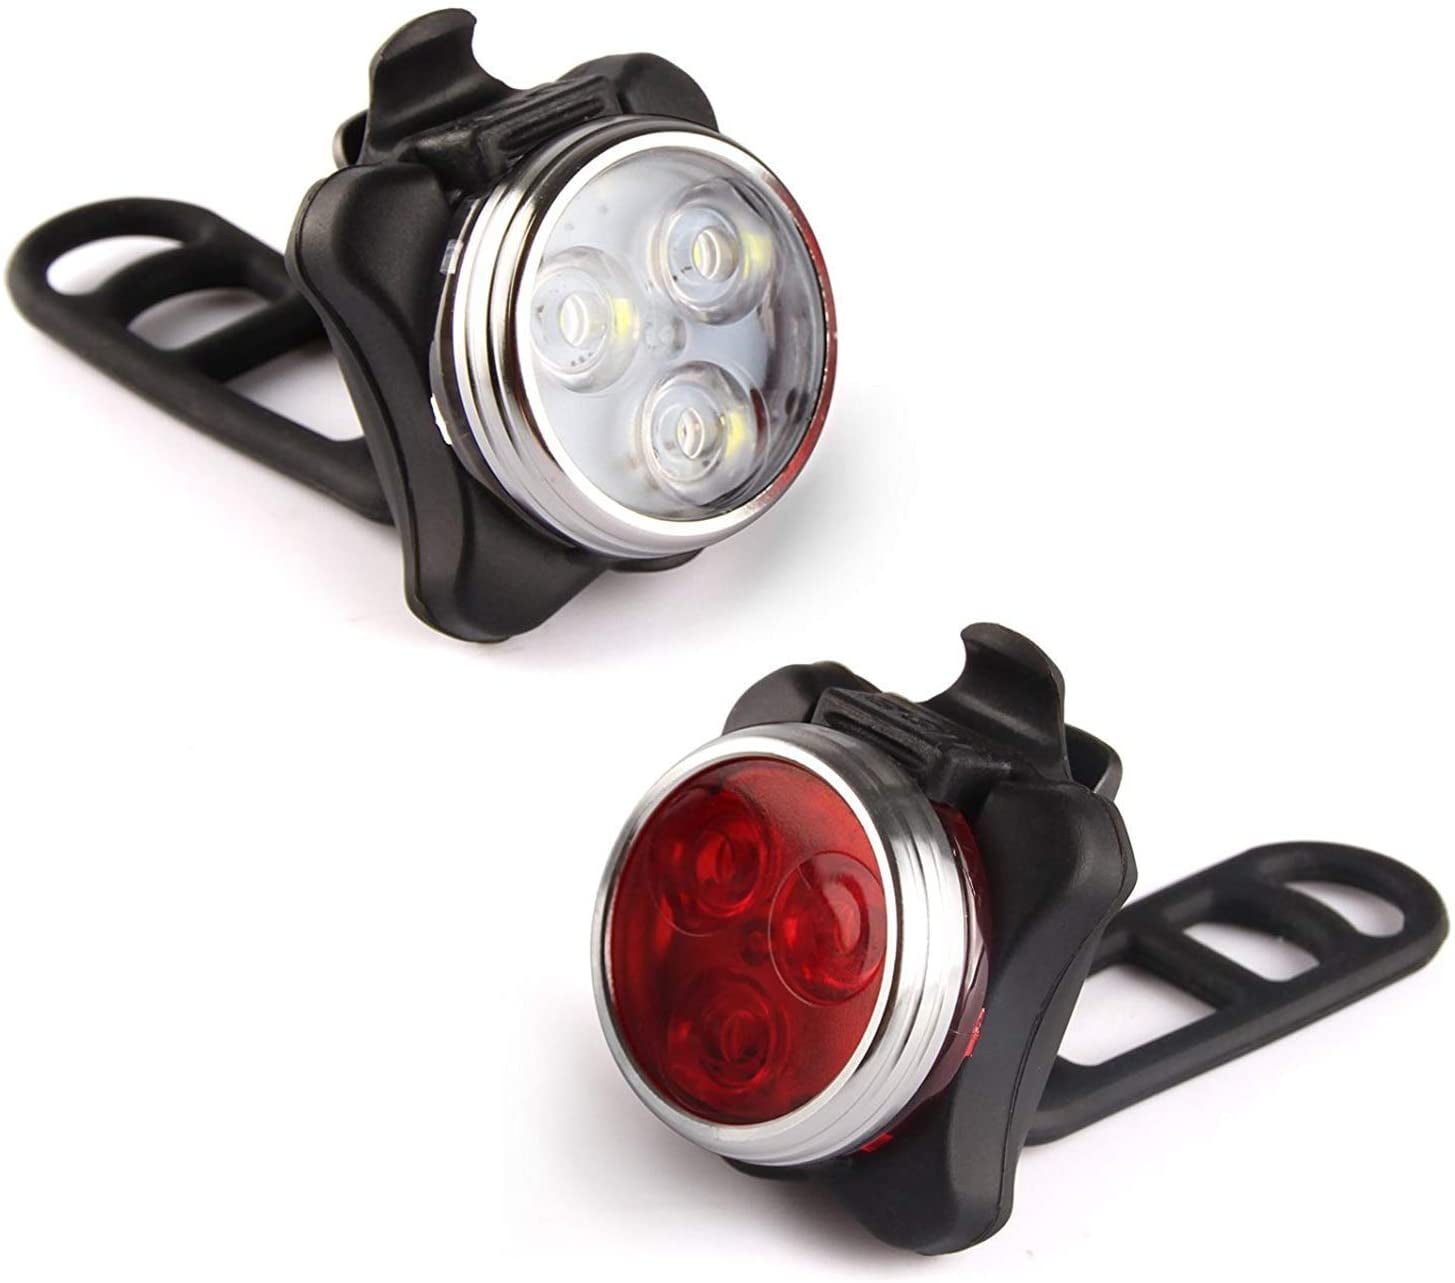 Bright 4 Mode Front Light USB Rechargeable LED Lamp & Taillight for Bike Bicycle 